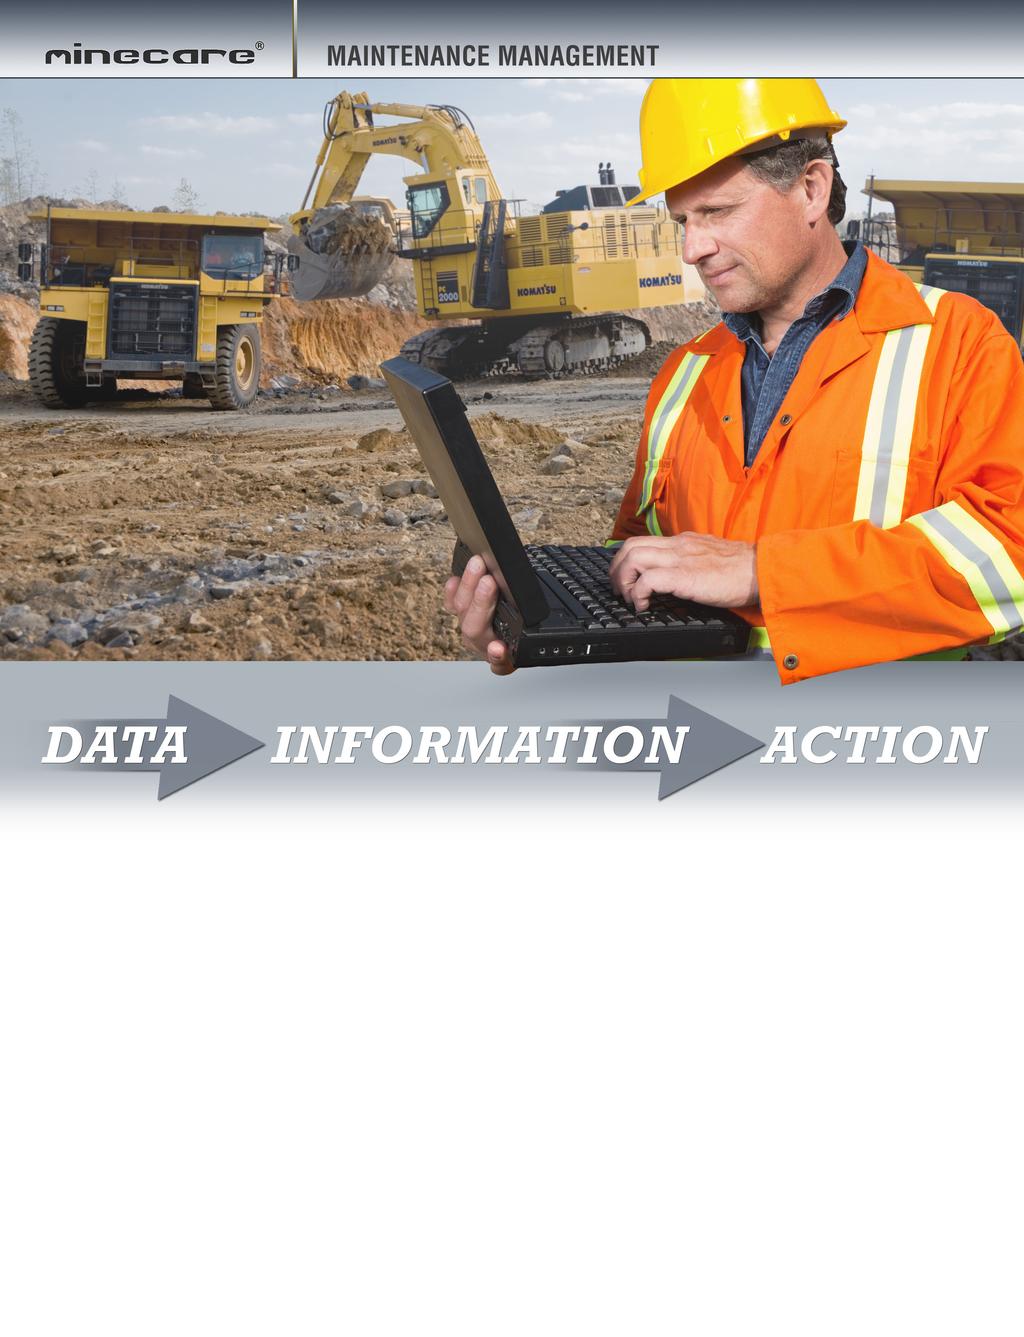 Modular introduced the mining industry to Real-Time Maintenance Management in 2004.